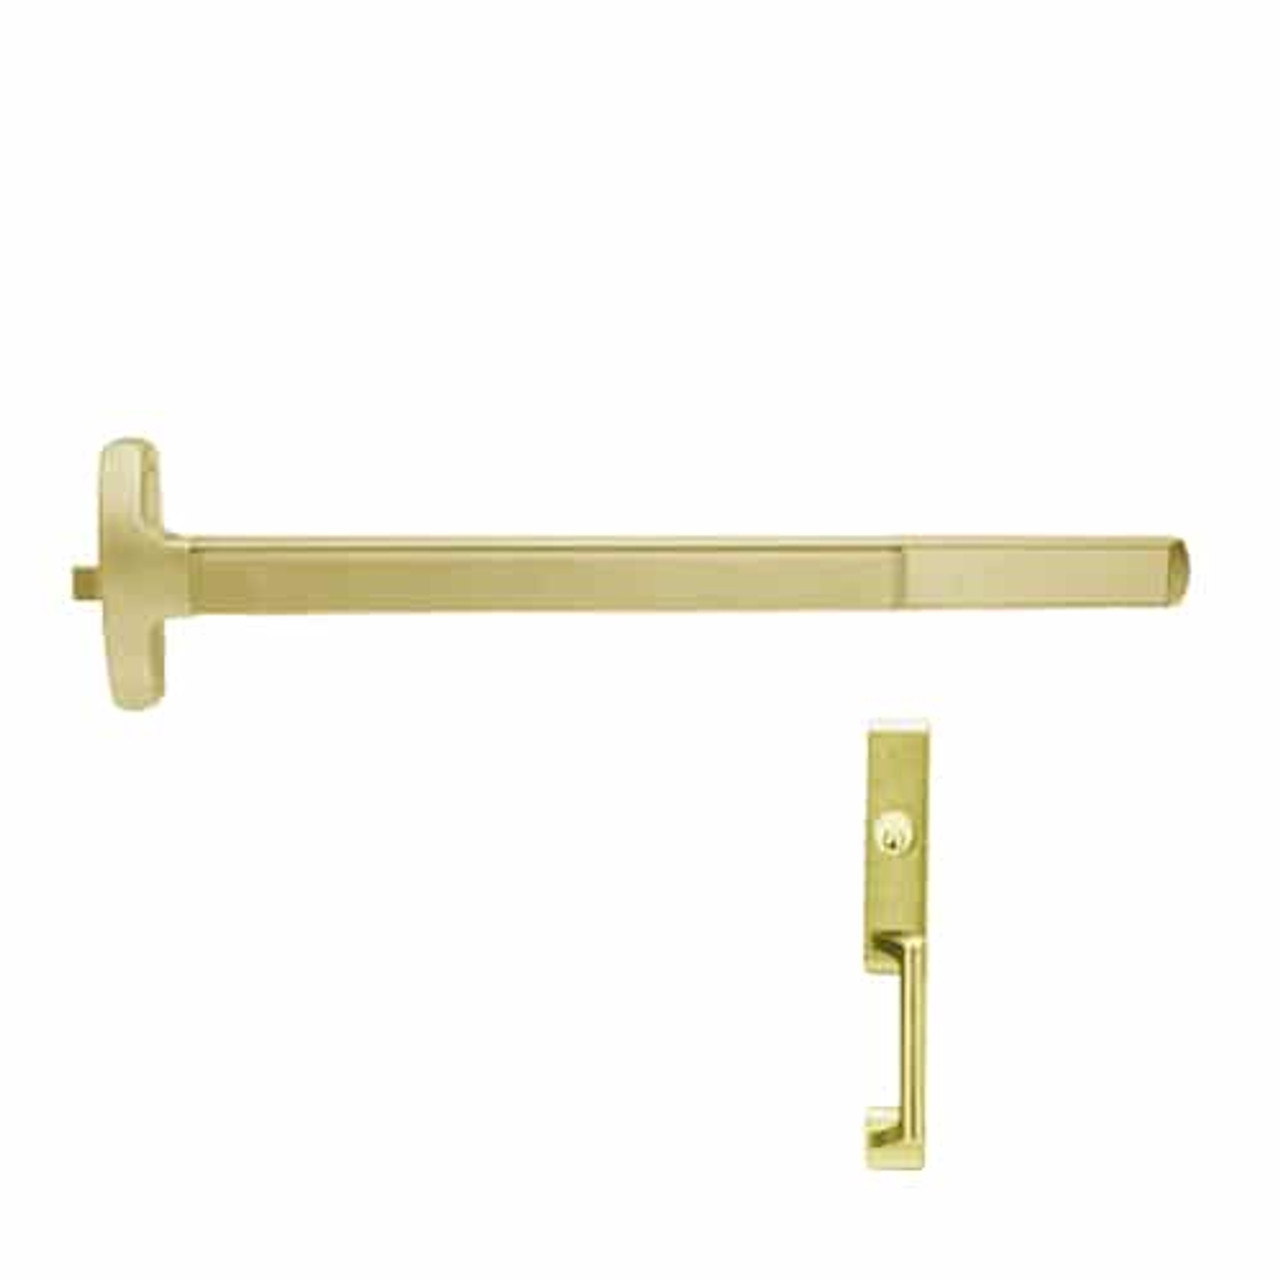 F-24-R-NL-US4-4-LHR Falcon Exit Device in Satin Brass